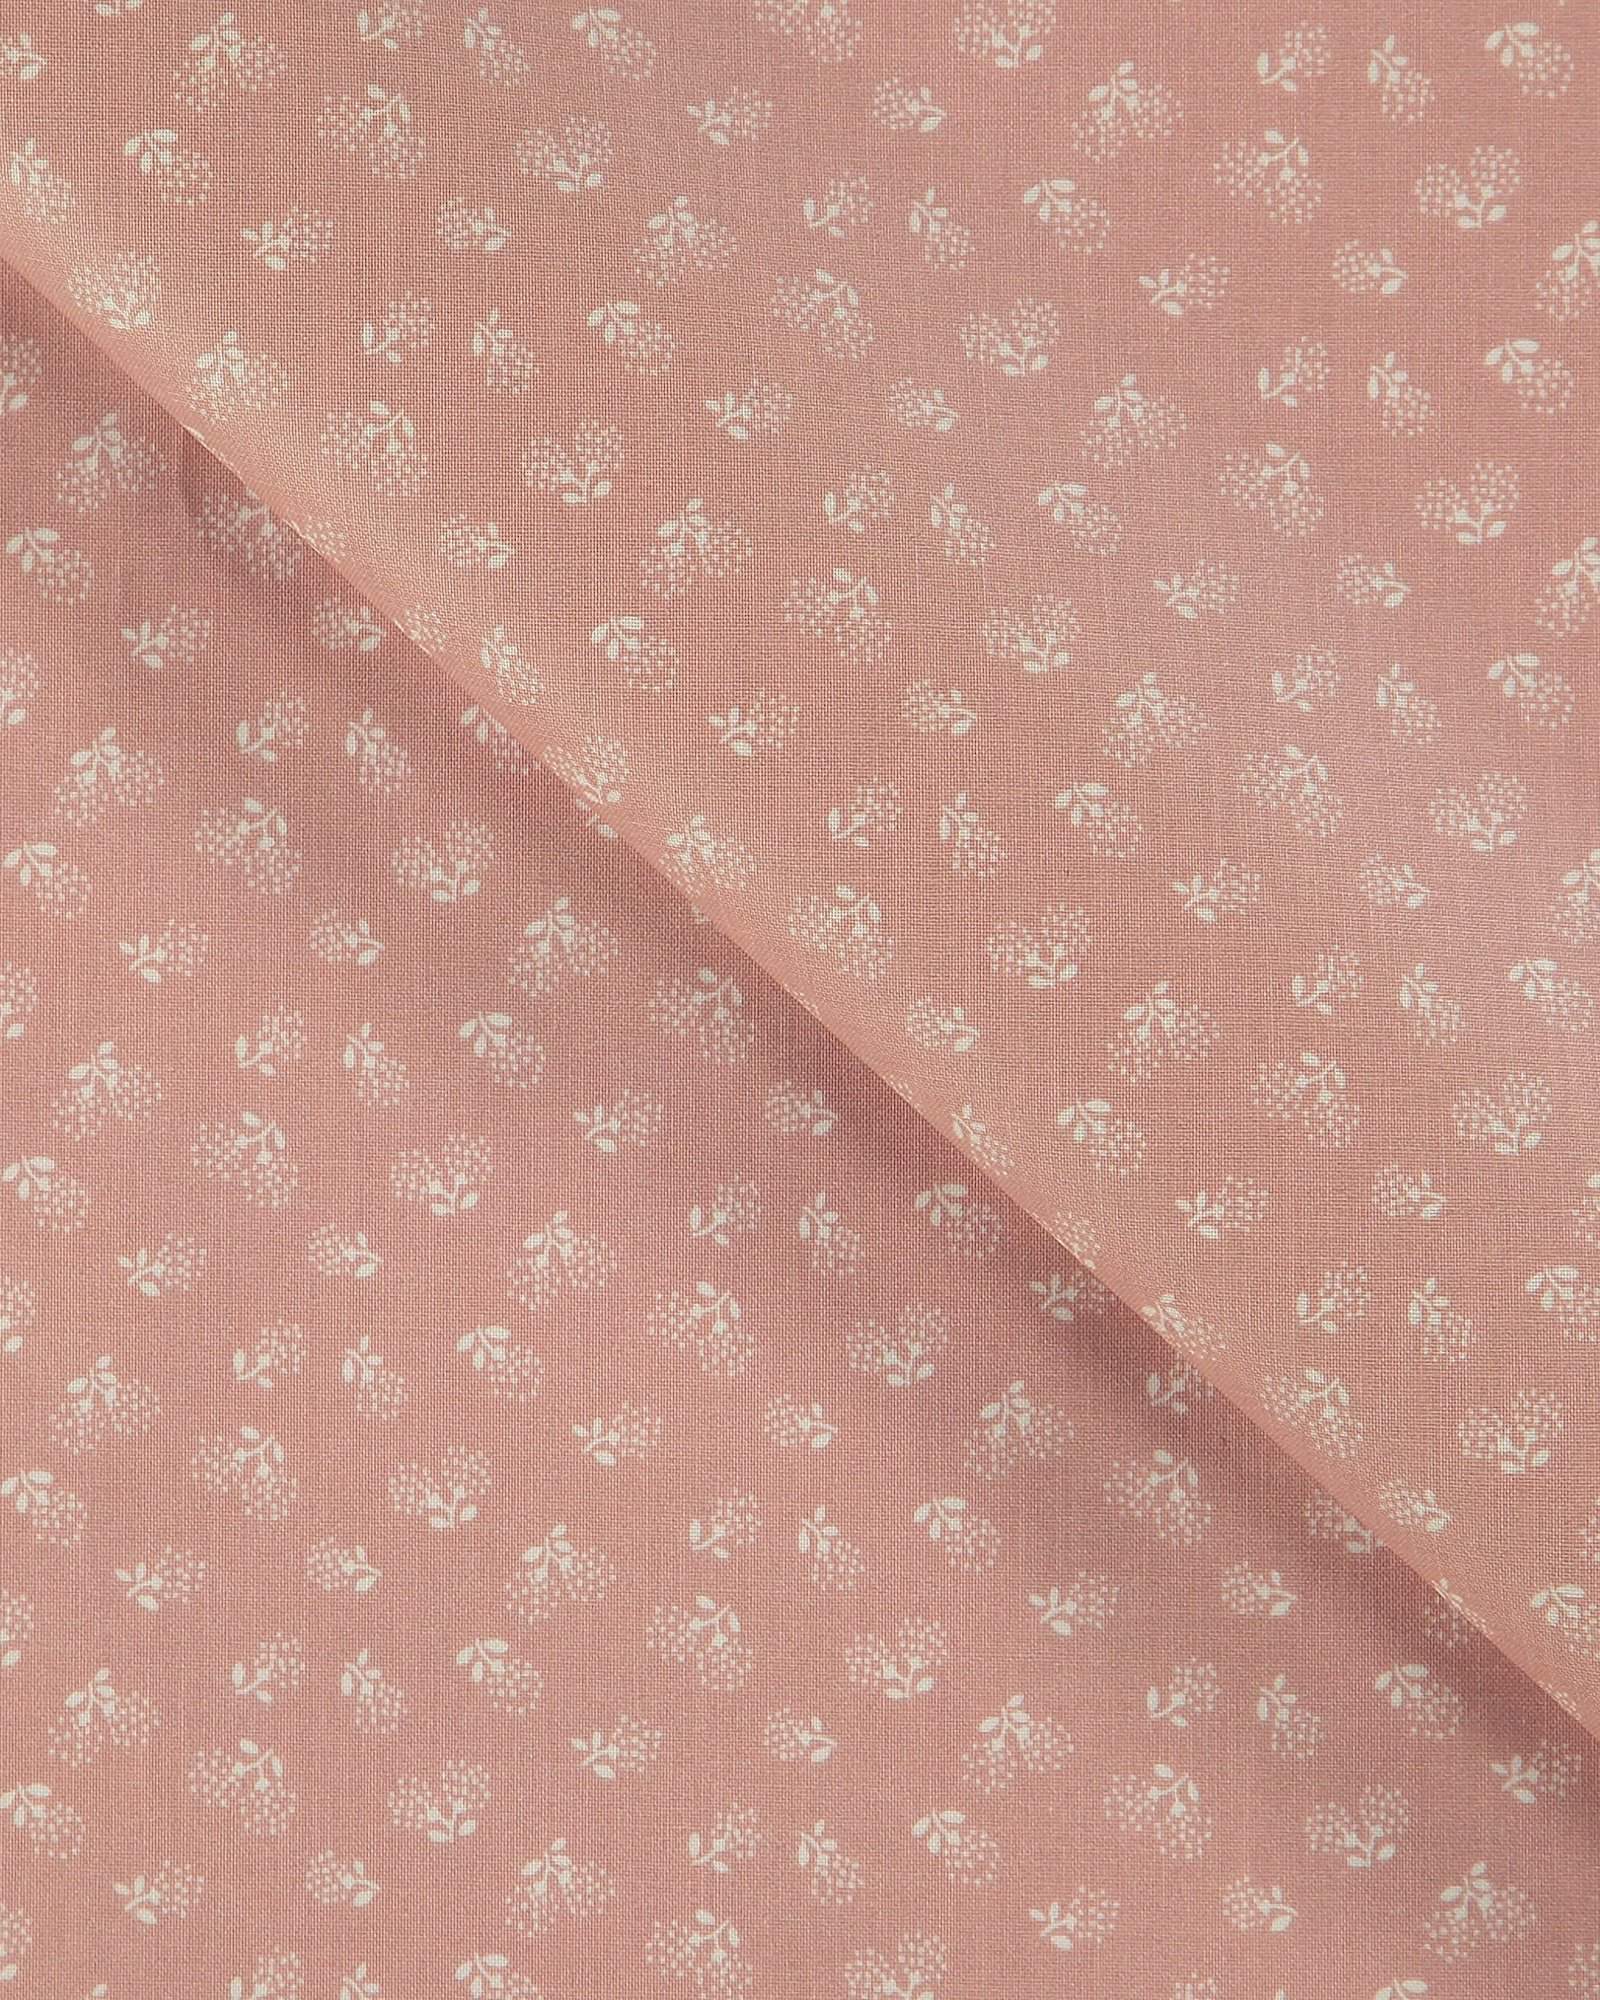 Woven oil cloth dusty rose with flowers 866138_pack